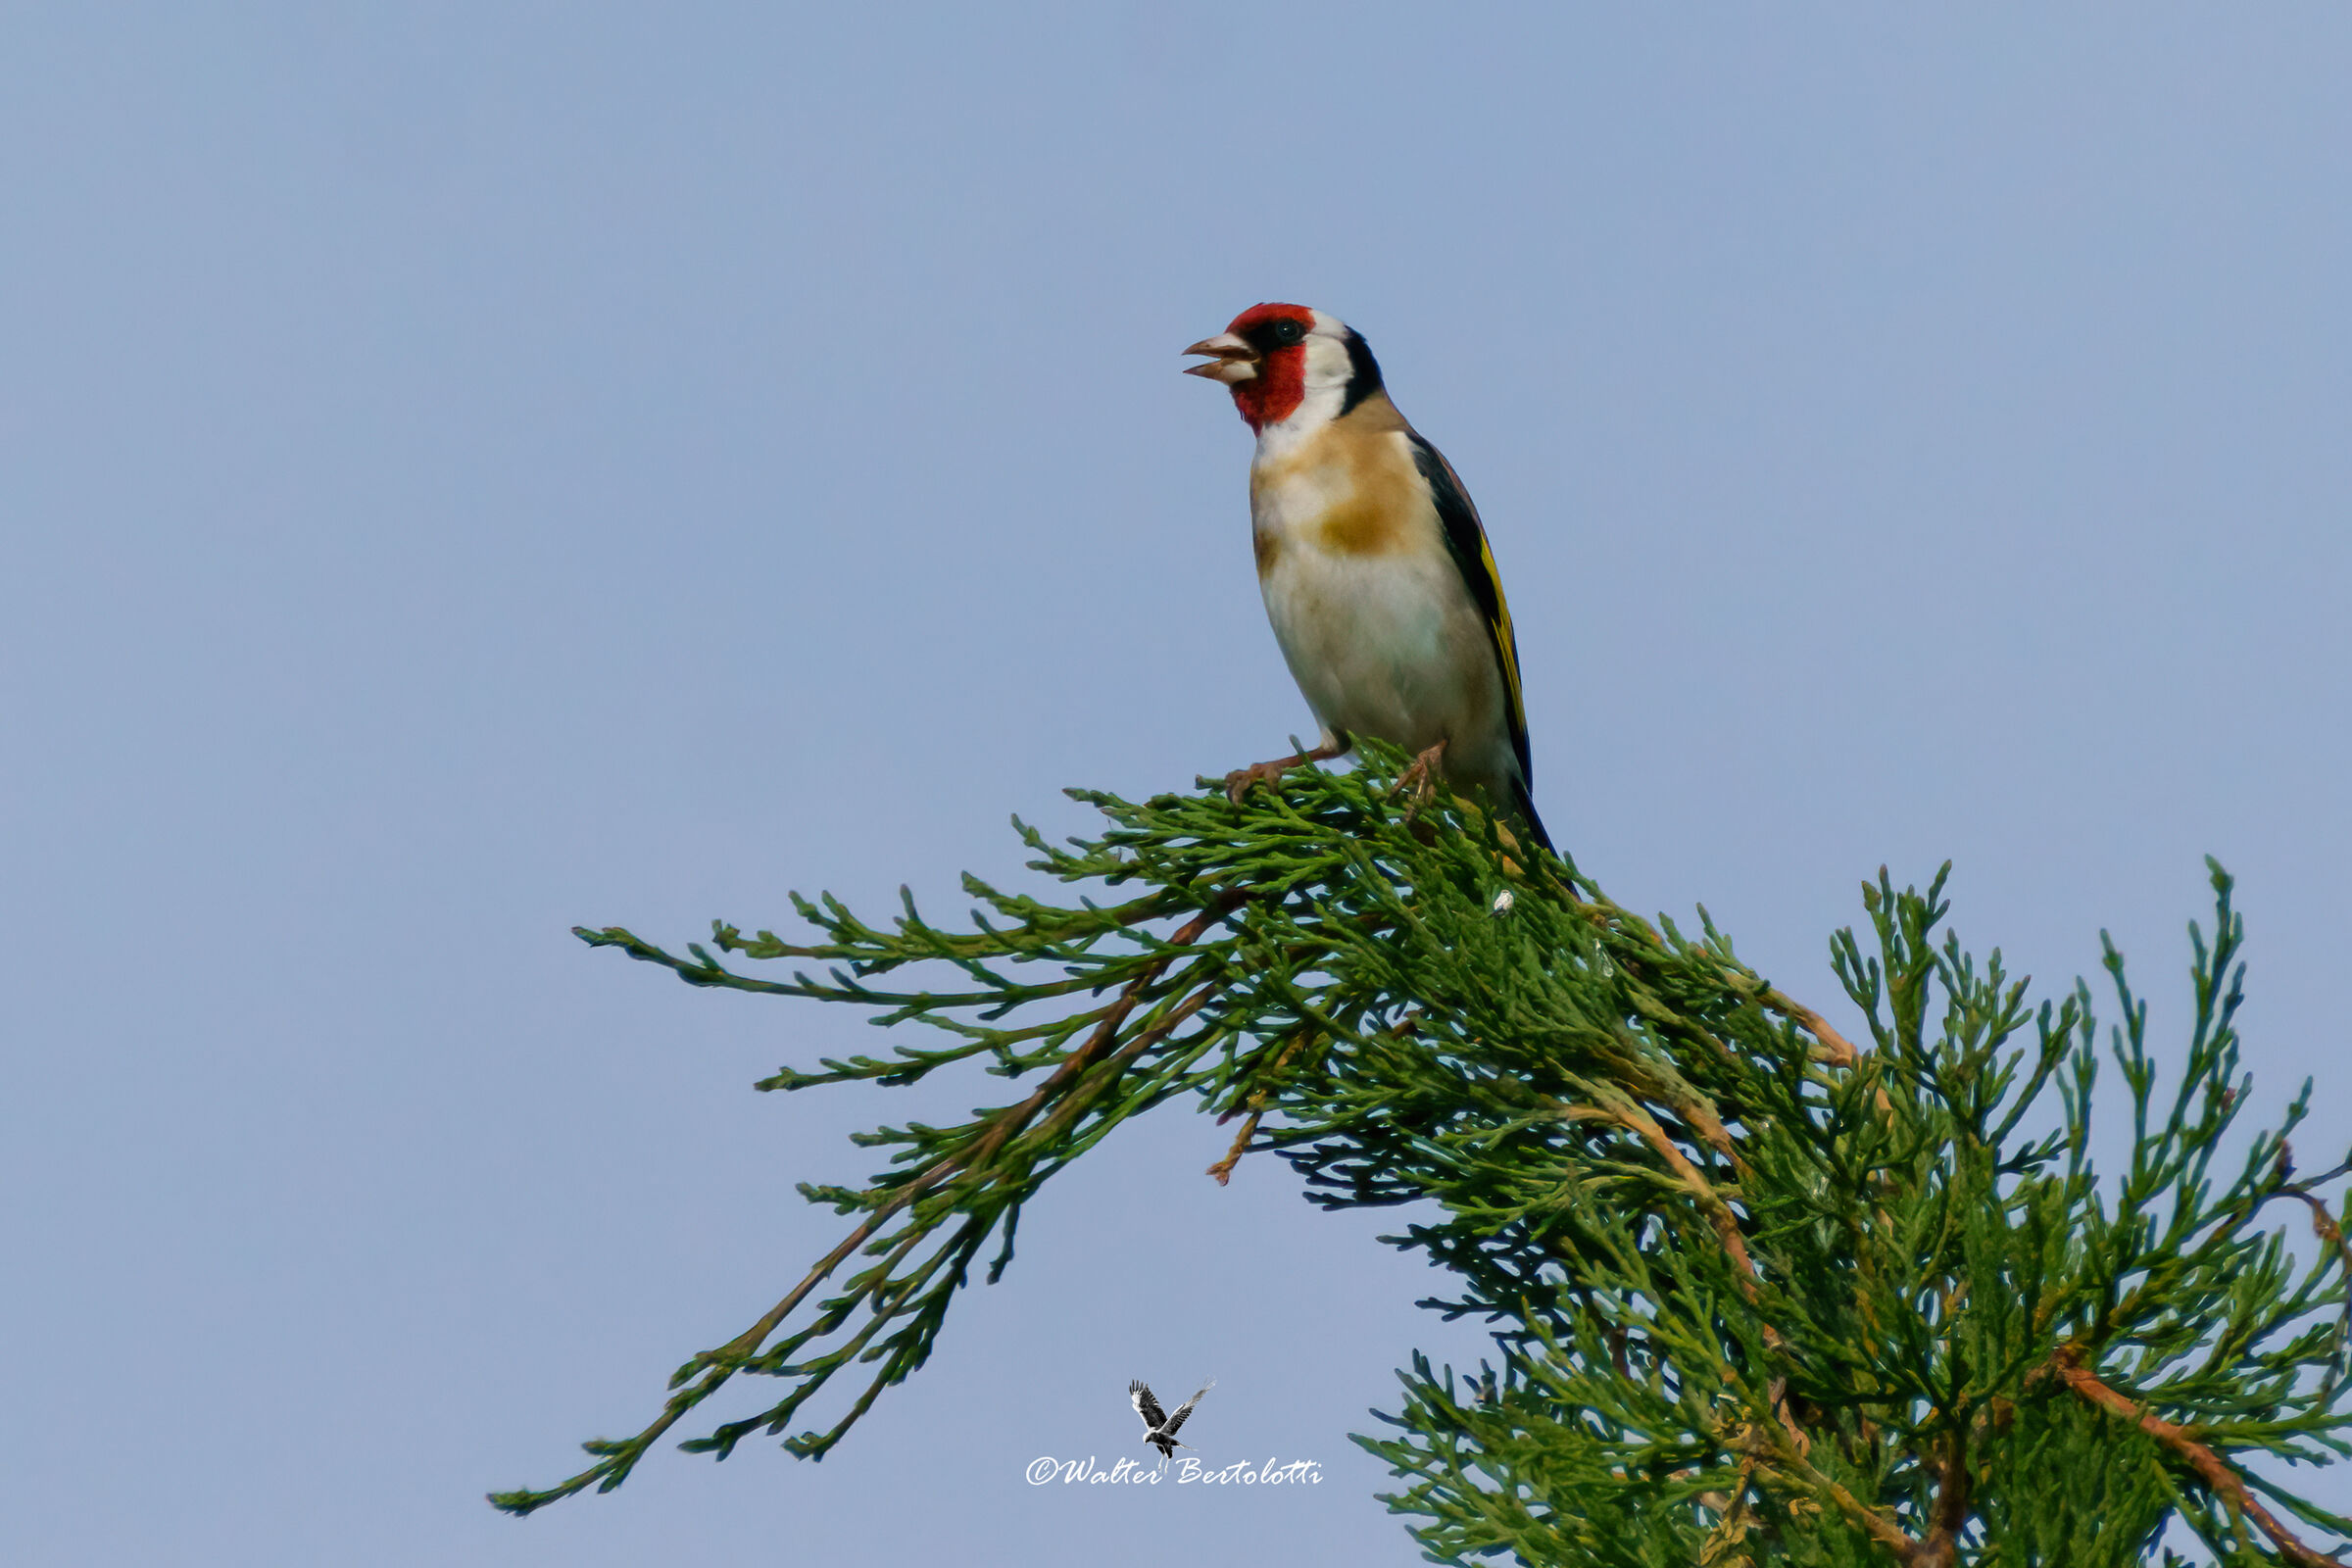 the free singing of the goldfinch...